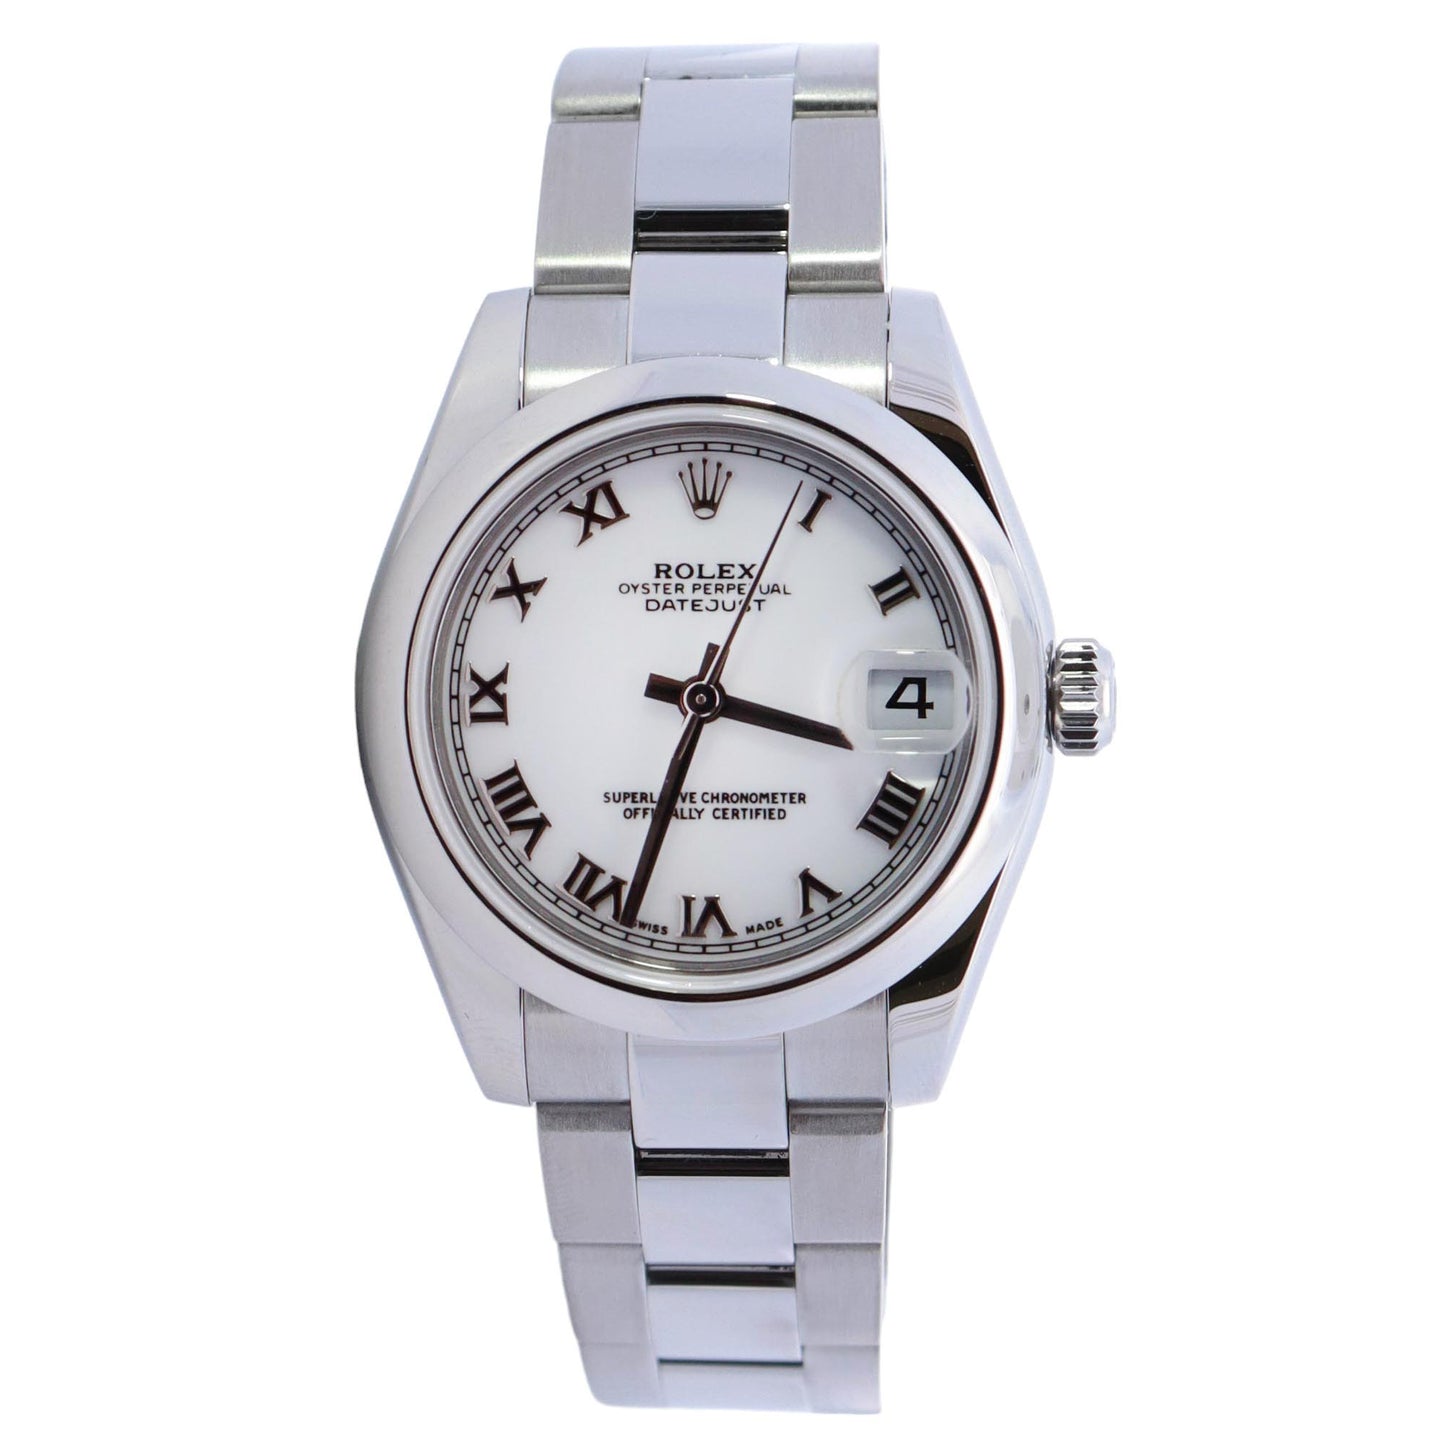 Rolex Datejust Stainless Steel 31mm White Roman Dial Watch Reference #: 178240